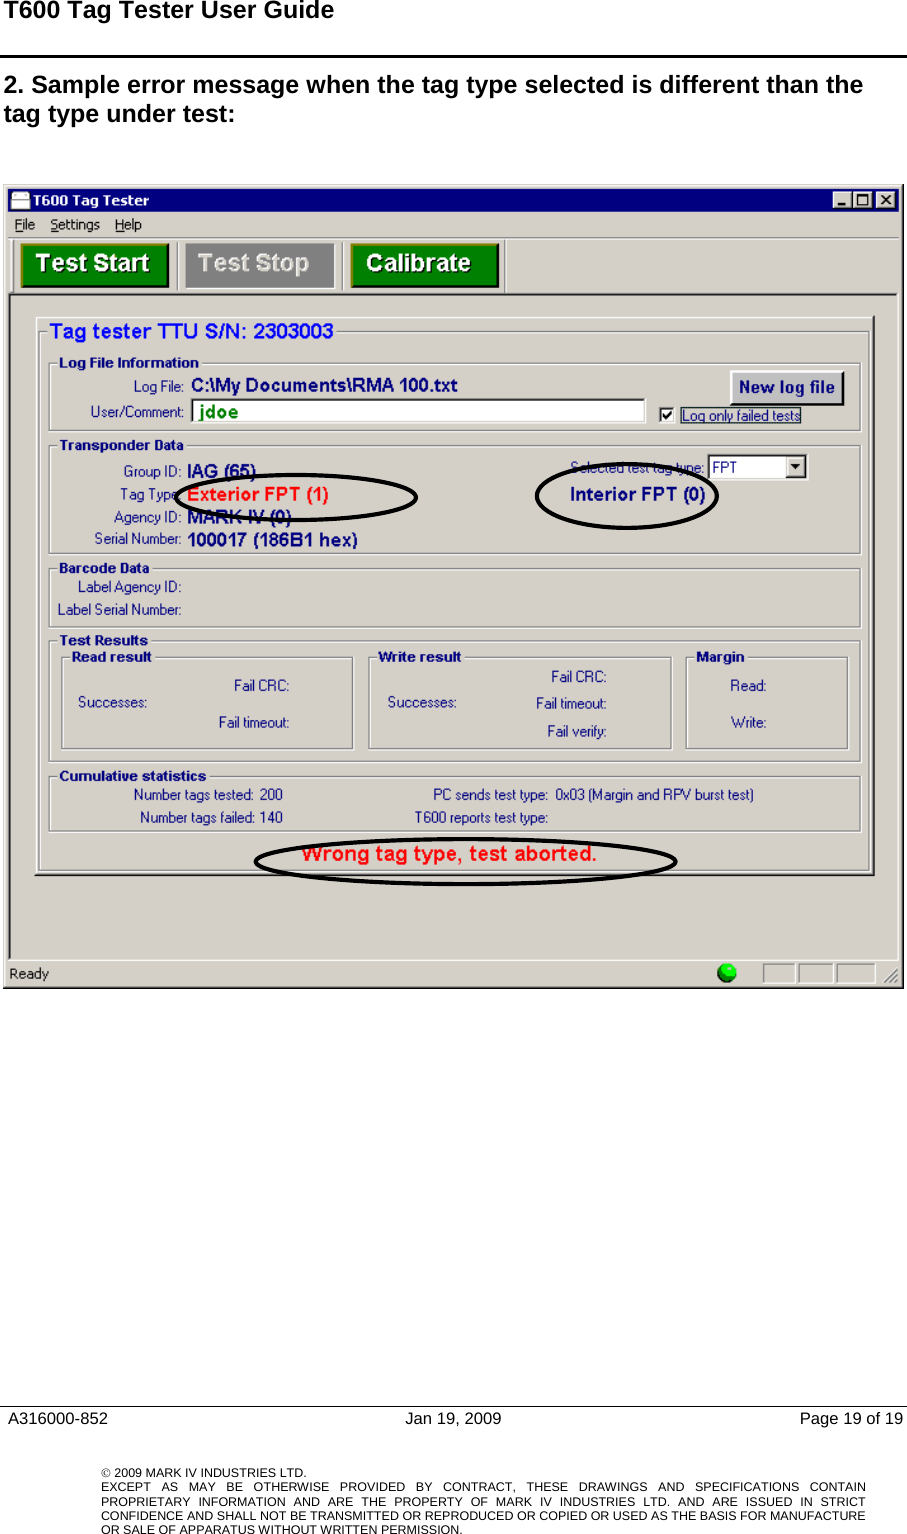 T600 Tag Tester User Guide   2. Sample error message when the tag type selected is different than the tag type under test:      A316000-852  Jan 19, 2009  Page 19 of 19    © 2009 MARK IV INDUSTRIES LTD. EXCEPT AS MAY BE OTHERWISE PROVIDED BY CONTRACT, THESE DRAWINGS AND SPECIFICATIONS CONTAINPROPRIETARY INFORMATION AND ARE THE PROPERTY OF MARK IV INDUSTRIES LTD. AND ARE ISSUED IN STRICT CONFIDENCE AND SHALL NOT BE TRANSMITTED OR REPRODUCED OR COPIED OR USED AS THE BASIS FOR MANUFACTUREOR SALE OF APPARATUS WITHOUT WRITTEN PERMISSION.